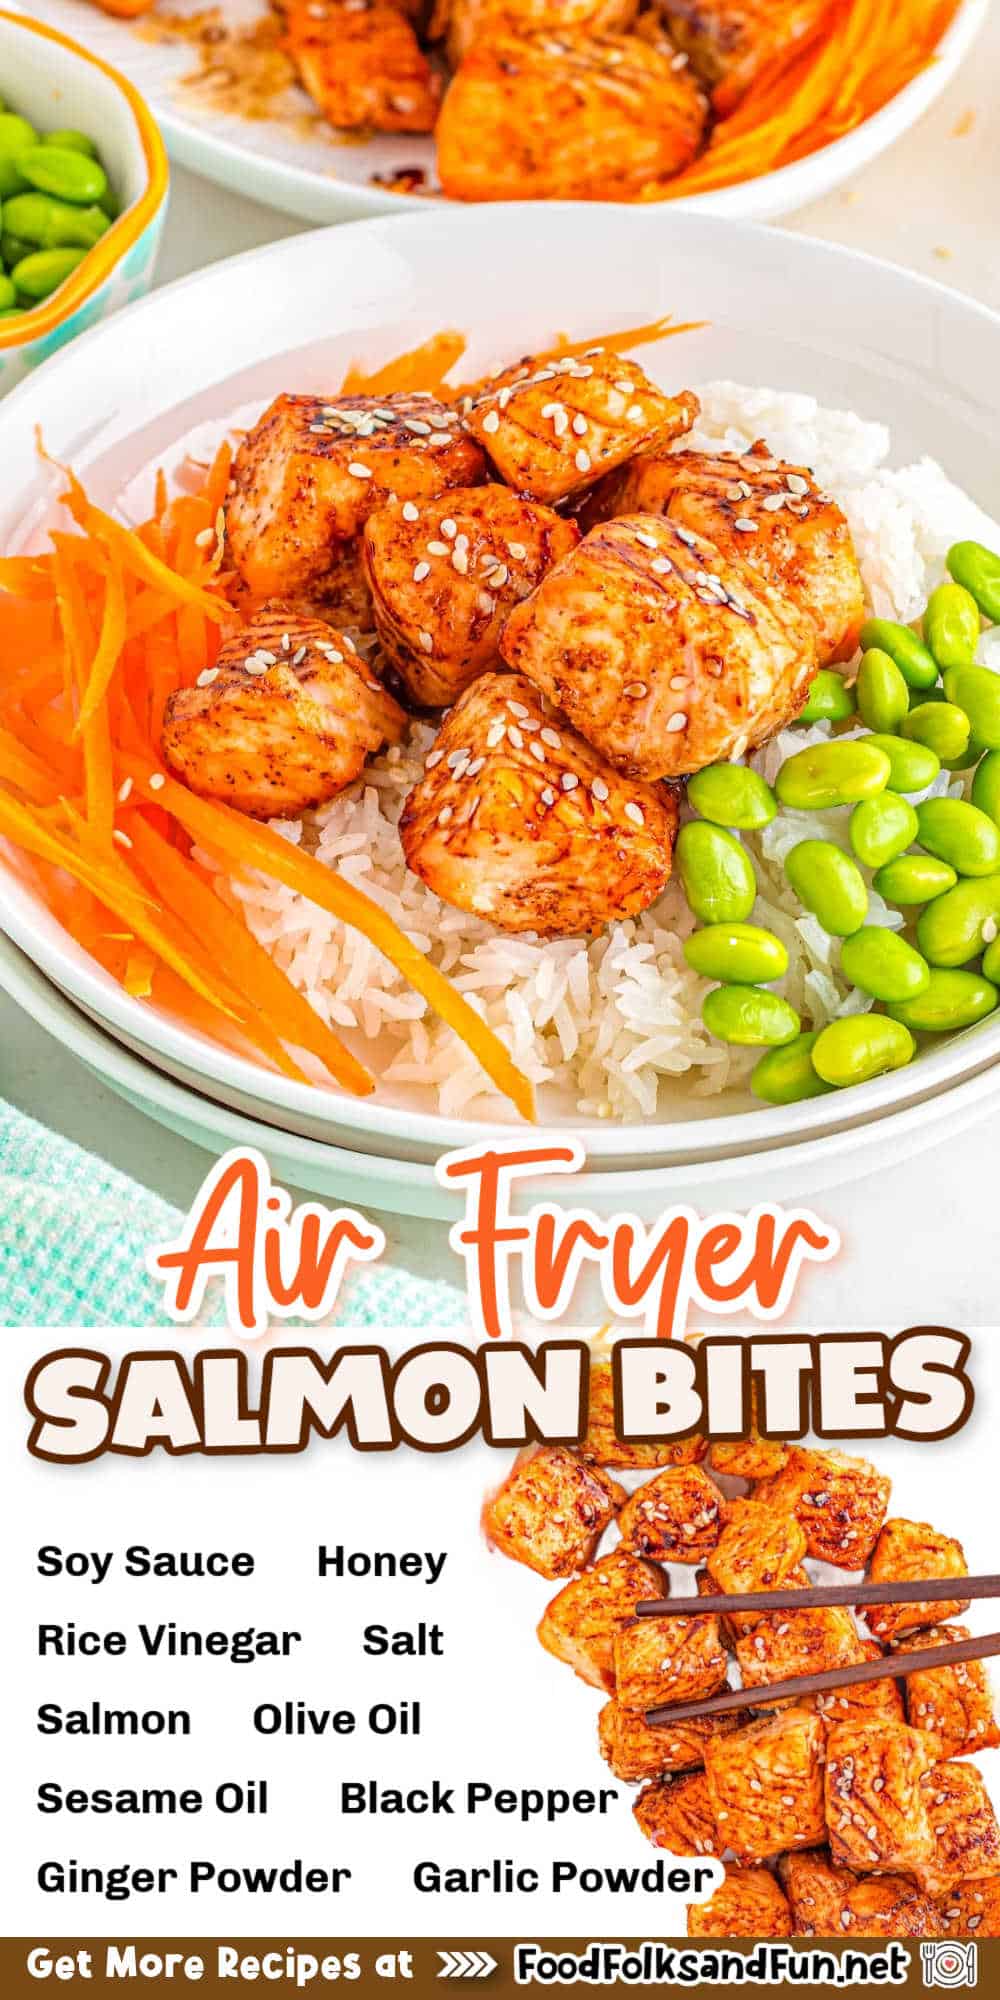 This dish will work as a main dish for two or an appetizer for four. These bites are perfect served over a bed of rice with edamame and carrots for a quick and easy sushi-style bowl! via @foodfolksandfun